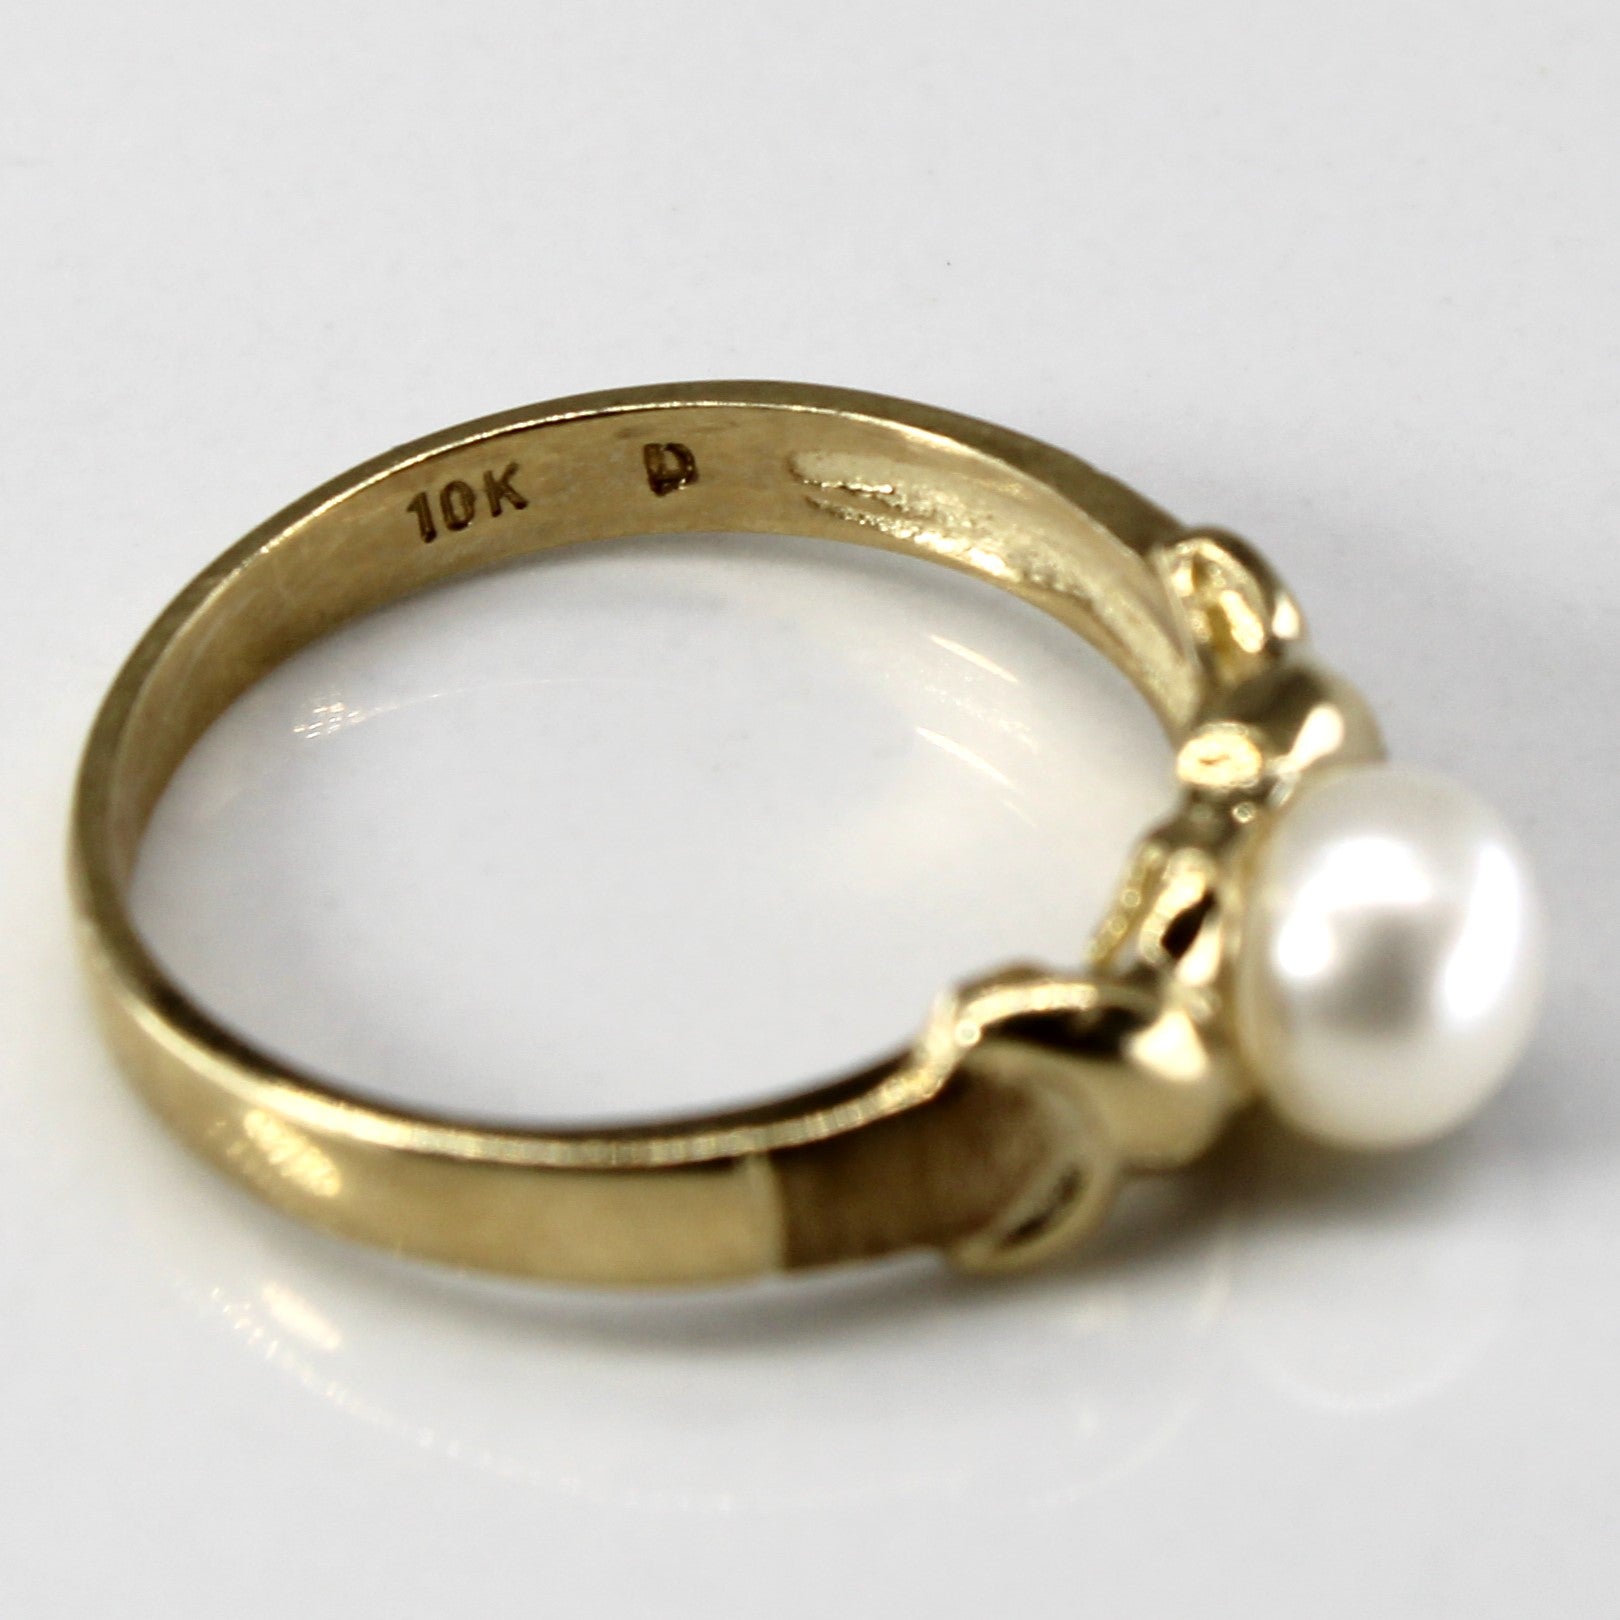 Pearl Crossover Gold Ring | SZ 5.25 |